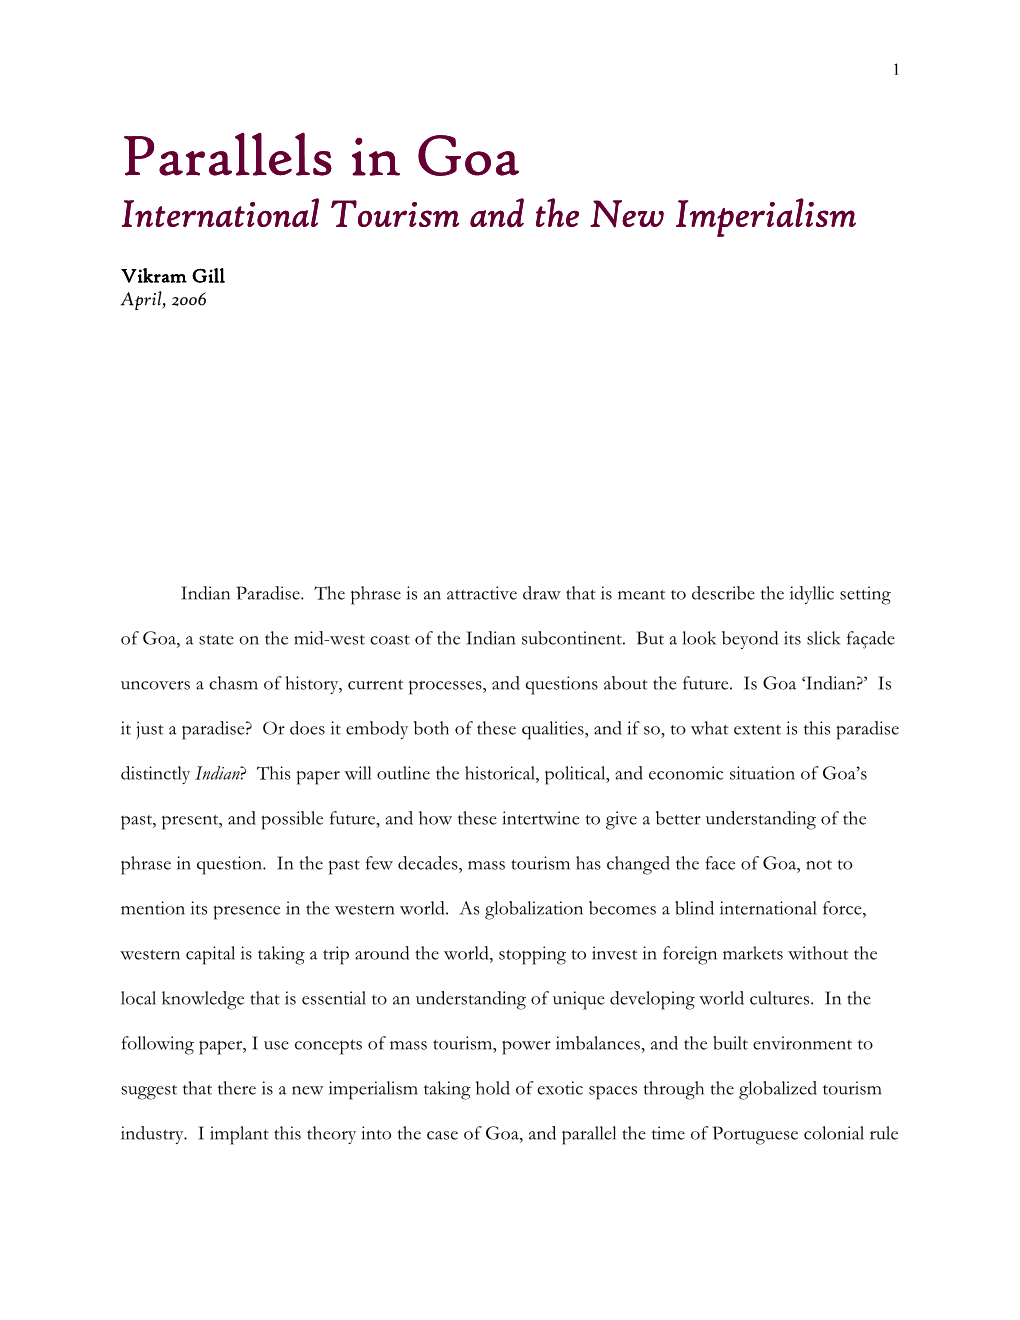 Parallels in Goa: International Tourism and the New Imperialism